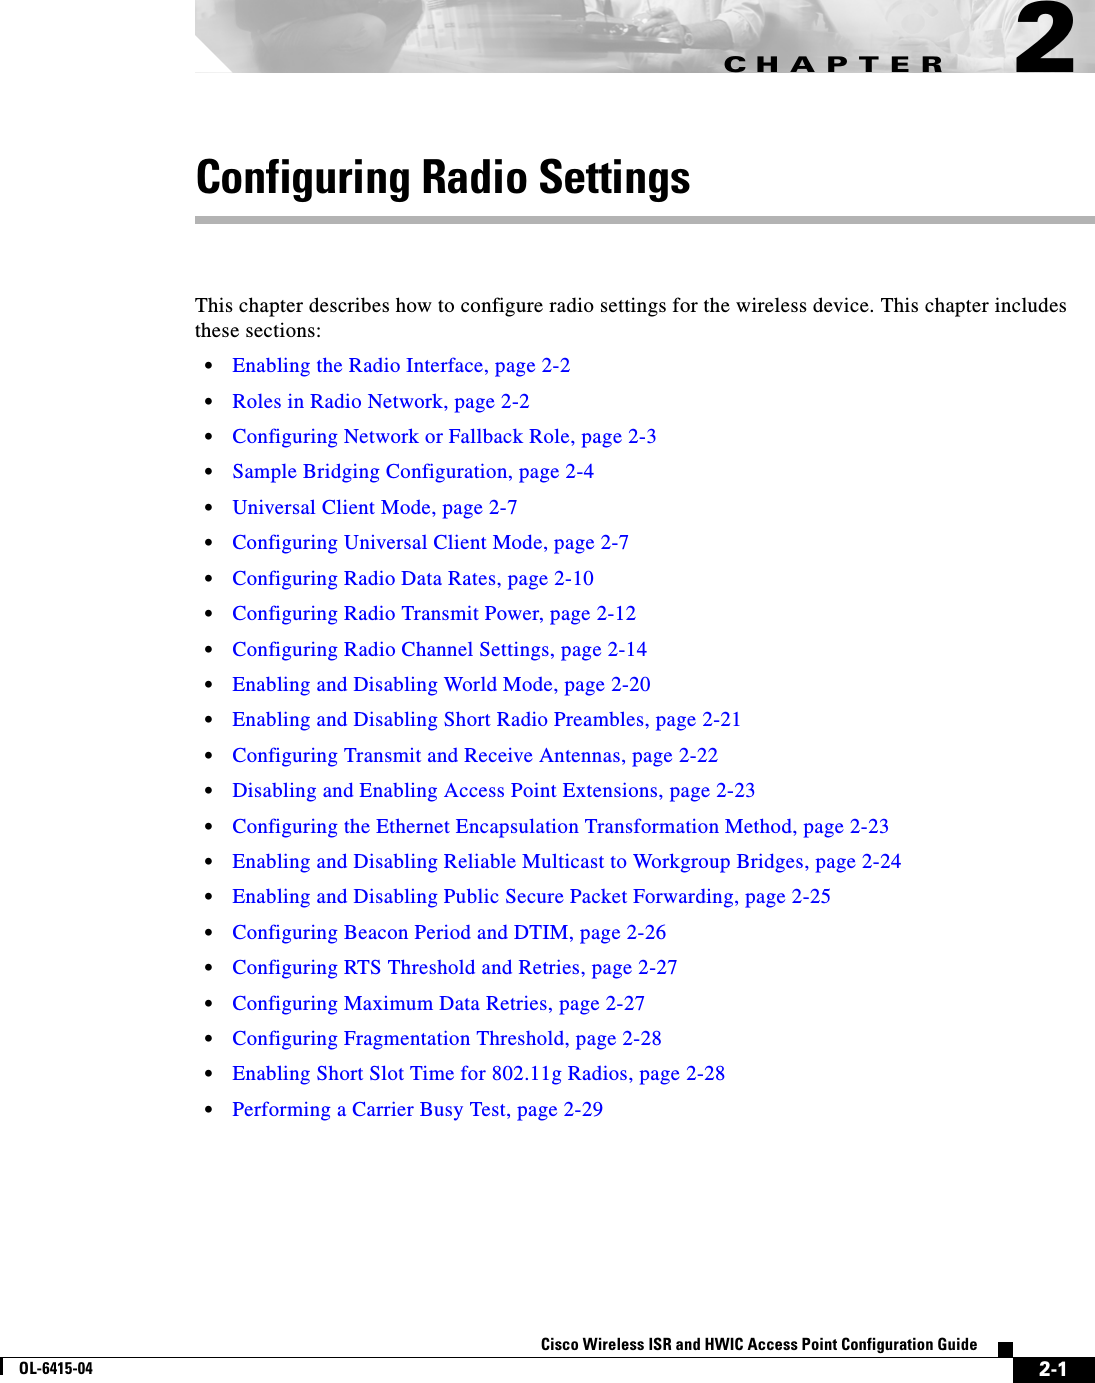 CHAPTER 2-1Cisco Wireless ISR and HWIC Access Point Configuration GuideOL-6415-042Configuring Radio SettingsThis chapter describes how to configure radio settings for the wireless device. This chapter includes these sections:  • Enabling the Radio Interface, page 2-2  • Roles in Radio Network, page 2-2  • Configuring Network or Fallback Role, page 2-3  • Sample Bridging Configuration, page 2-4  • Universal Client Mode, page 2-7  • Configuring Universal Client Mode, page 2-7  • Configuring Radio Data Rates, page 2-10  • Configuring Radio Transmit Power, page 2-12  • Configuring Radio Channel Settings, page 2-14  • Enabling and Disabling World Mode, page 2-20  • Enabling and Disabling Short Radio Preambles, page 2-21  • Configuring Transmit and Receive Antennas, page 2-22  • Disabling and Enabling Access Point Extensions, page 2-23  • Configuring the Ethernet Encapsulation Transformation Method, page 2-23  • Enabling and Disabling Reliable Multicast to Workgroup Bridges, page 2-24  • Enabling and Disabling Public Secure Packet Forwarding, page 2-25  • Configuring Beacon Period and DTIM, page 2-26  • Configuring RTS Threshold and Retries, page 2-27  • Configuring Maximum Data Retries, page 2-27  • Configuring Fragmentation Threshold, page 2-28  • Enabling Short Slot Time for 802.11g Radios, page 2-28  • Performing a Carrier Busy Test, page 2-29